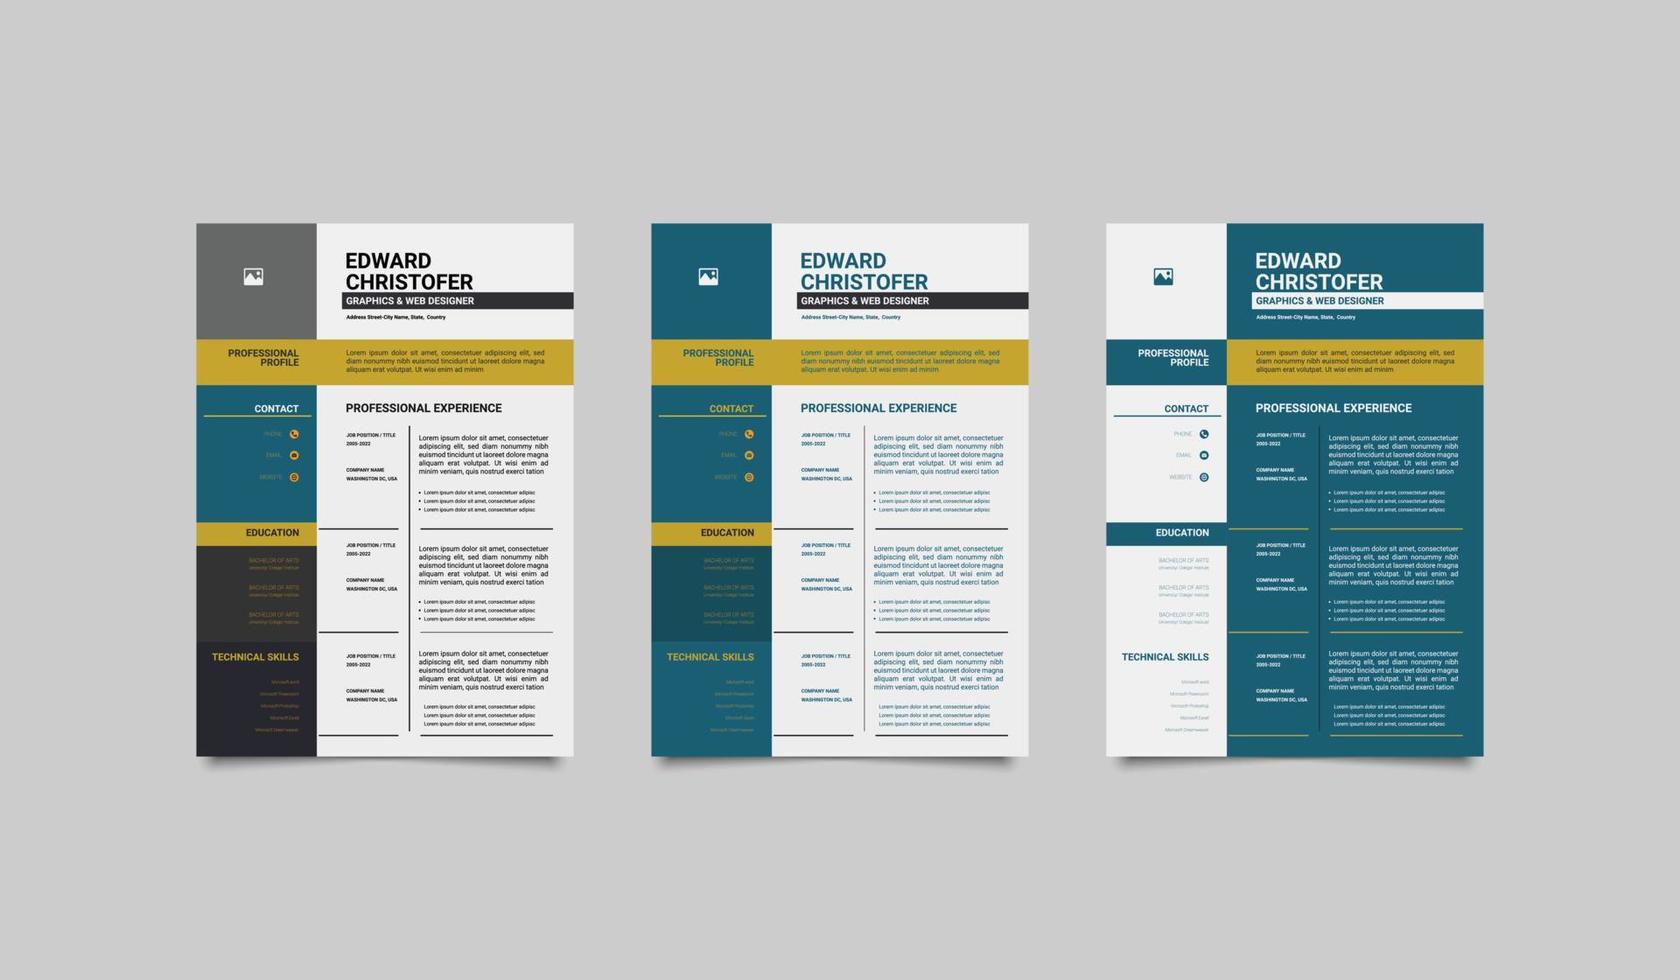 Resume Template. Professional Resume Template Design, A4 size and fully editable Resume vector